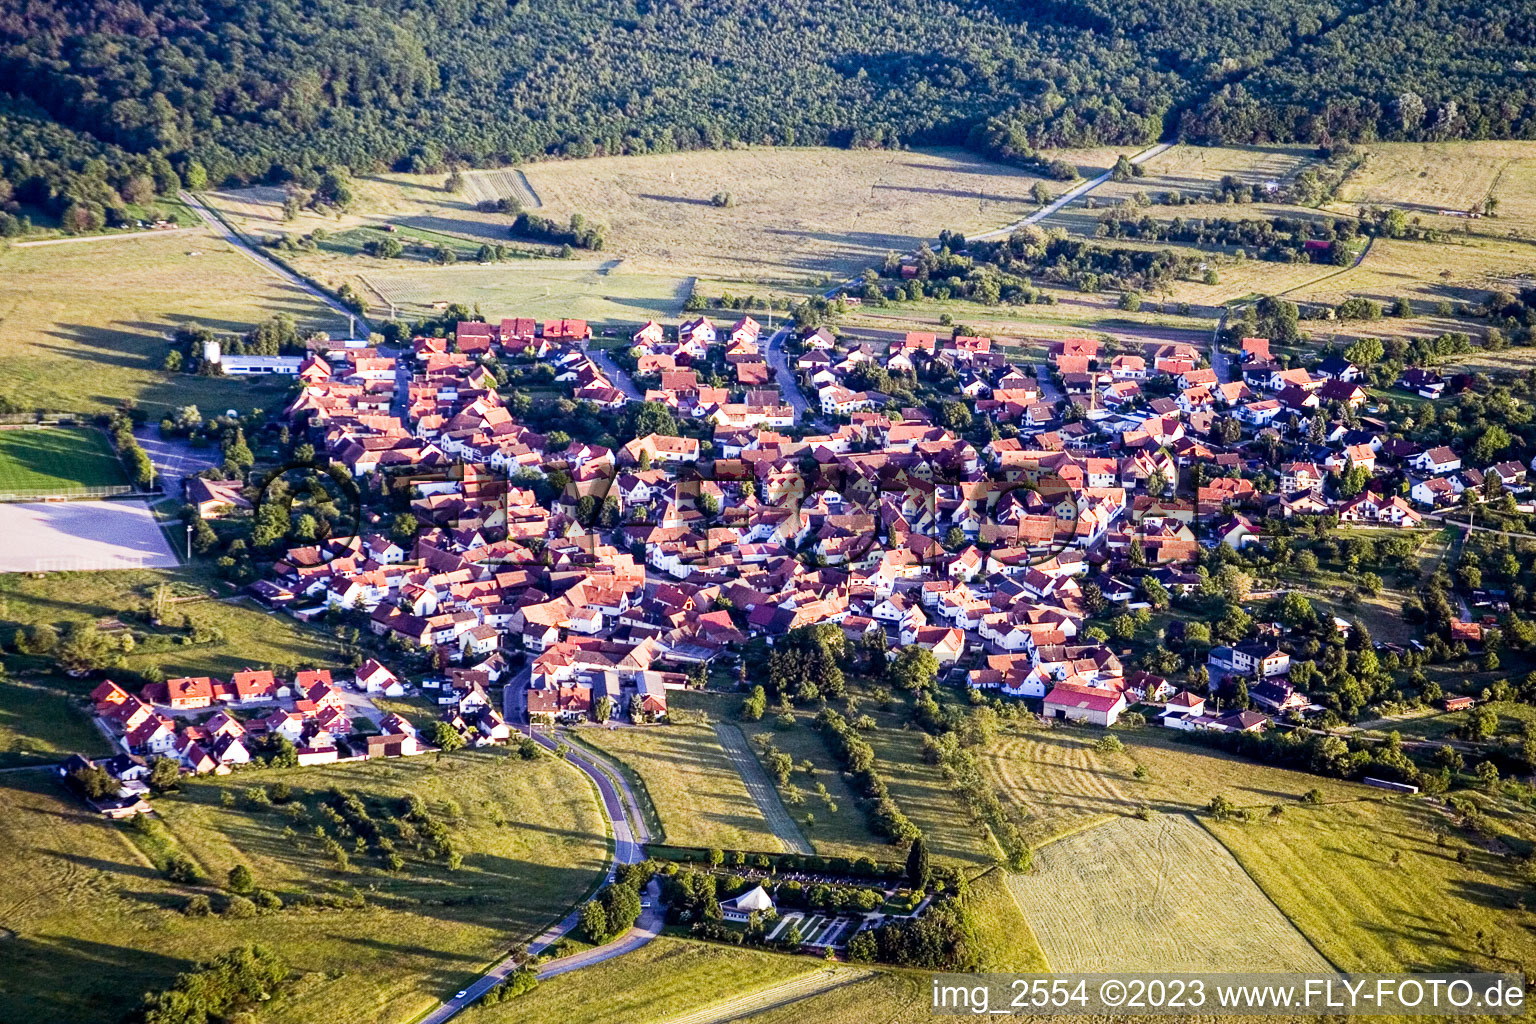 Aerial view of Village - view on the edge of agricultural fields and farmland in the district Buechelberg in Woerth am Rhein in the state Rhineland-Palatinate